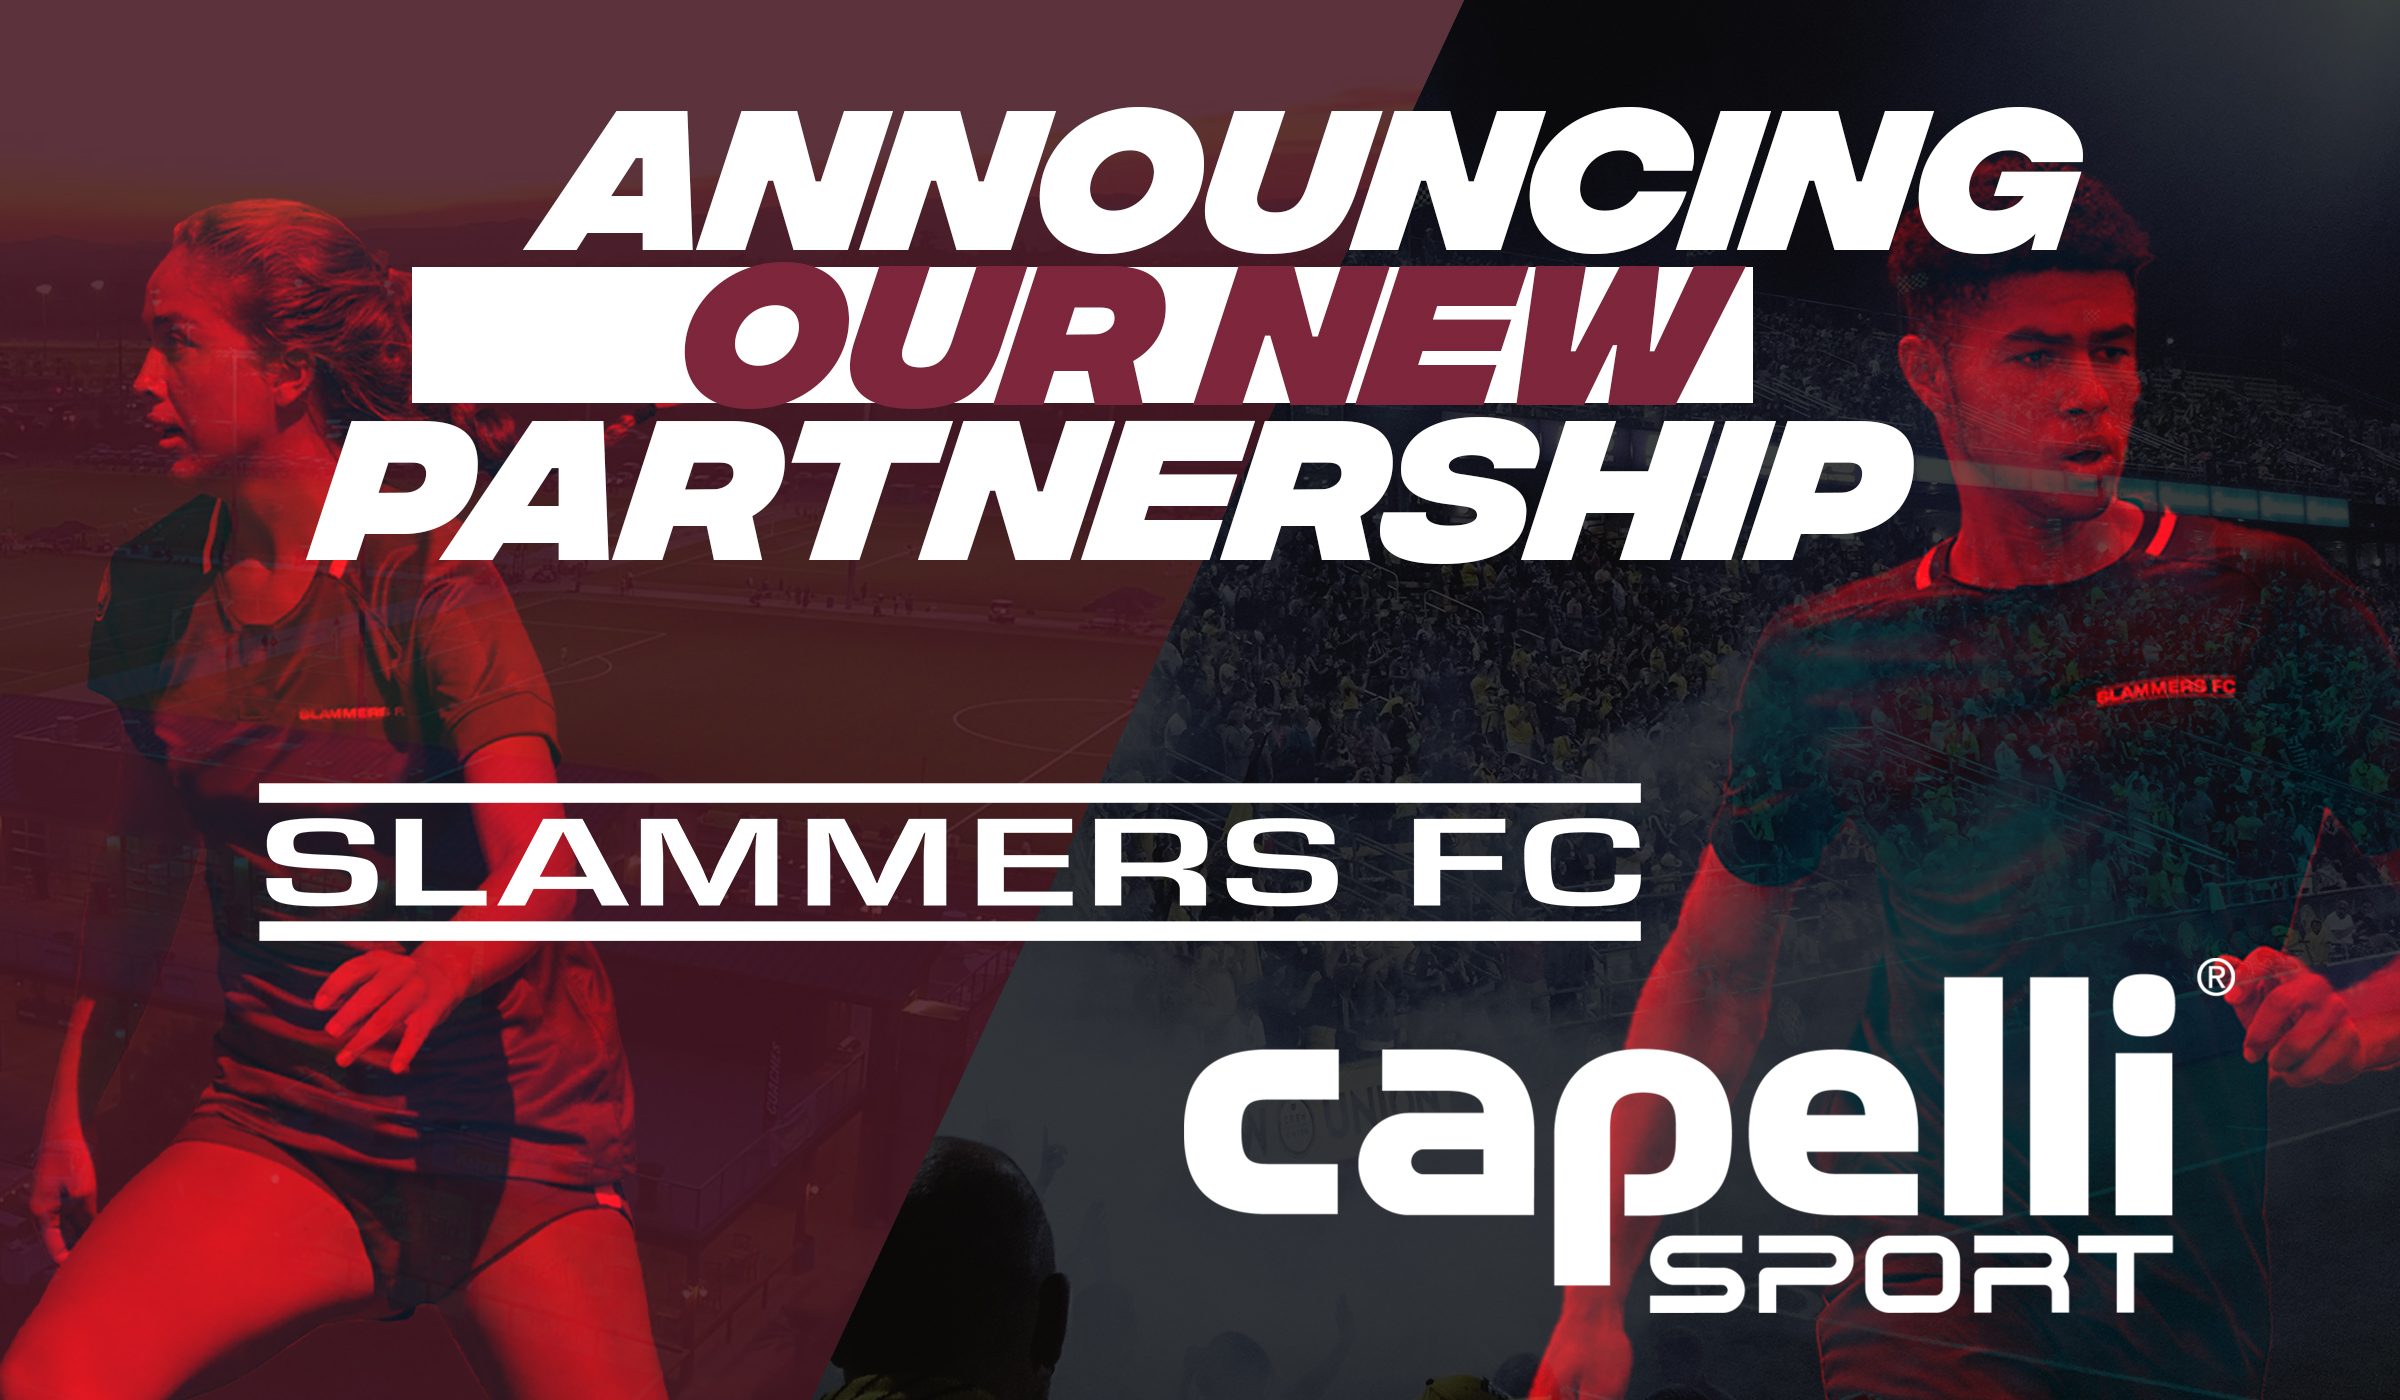 slammers fc and capelli sport logos